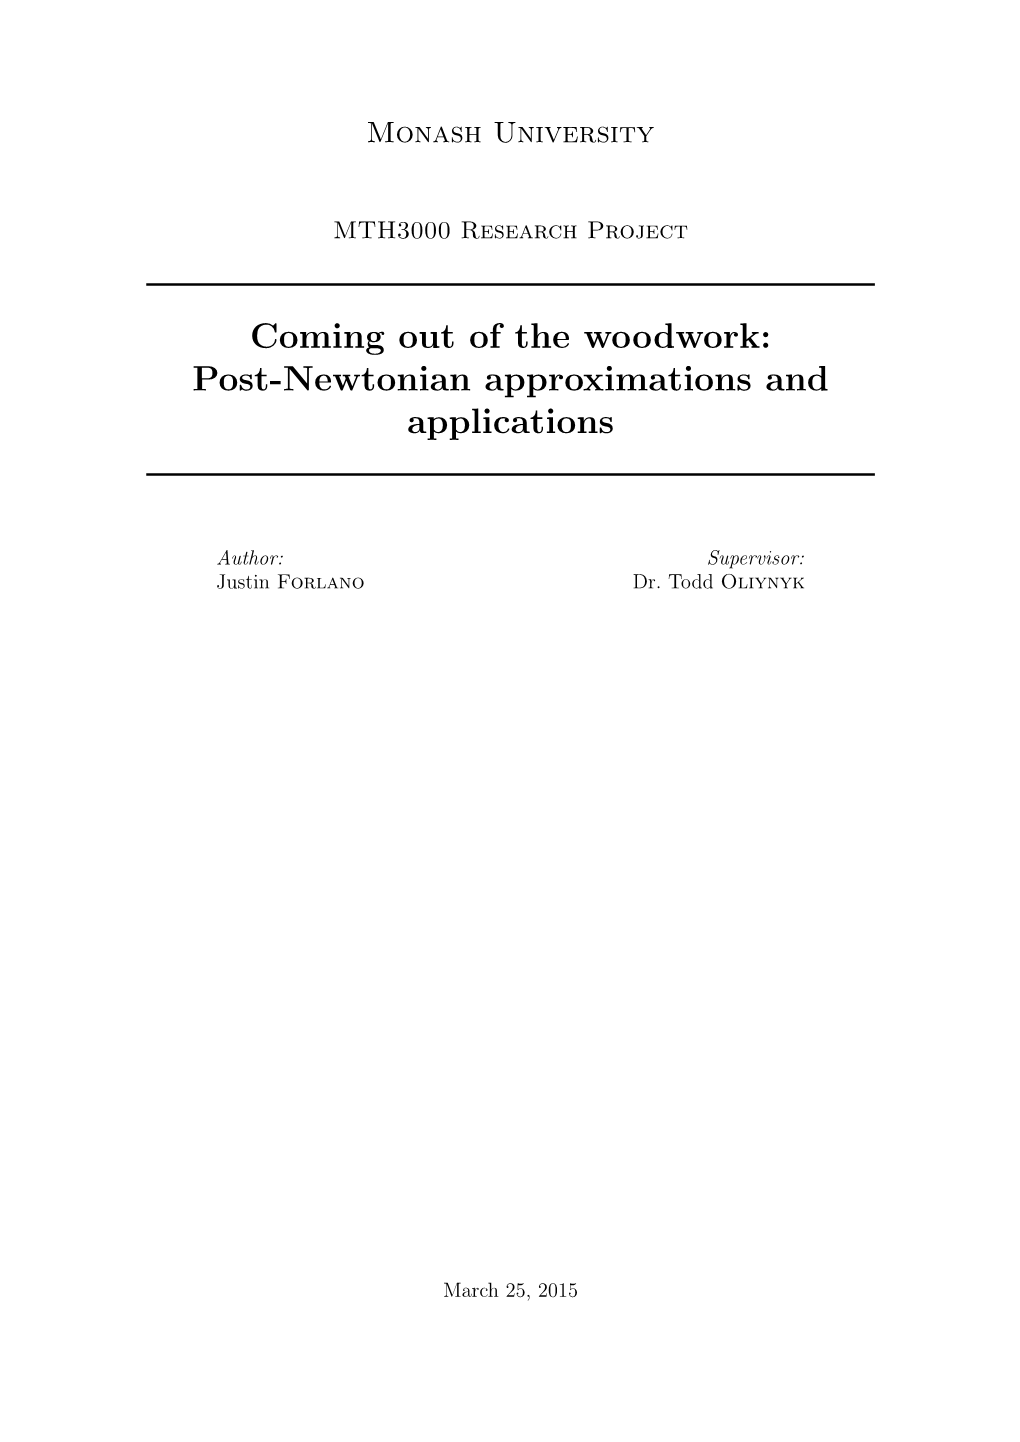 Post-Newtonian Approximations and Applications